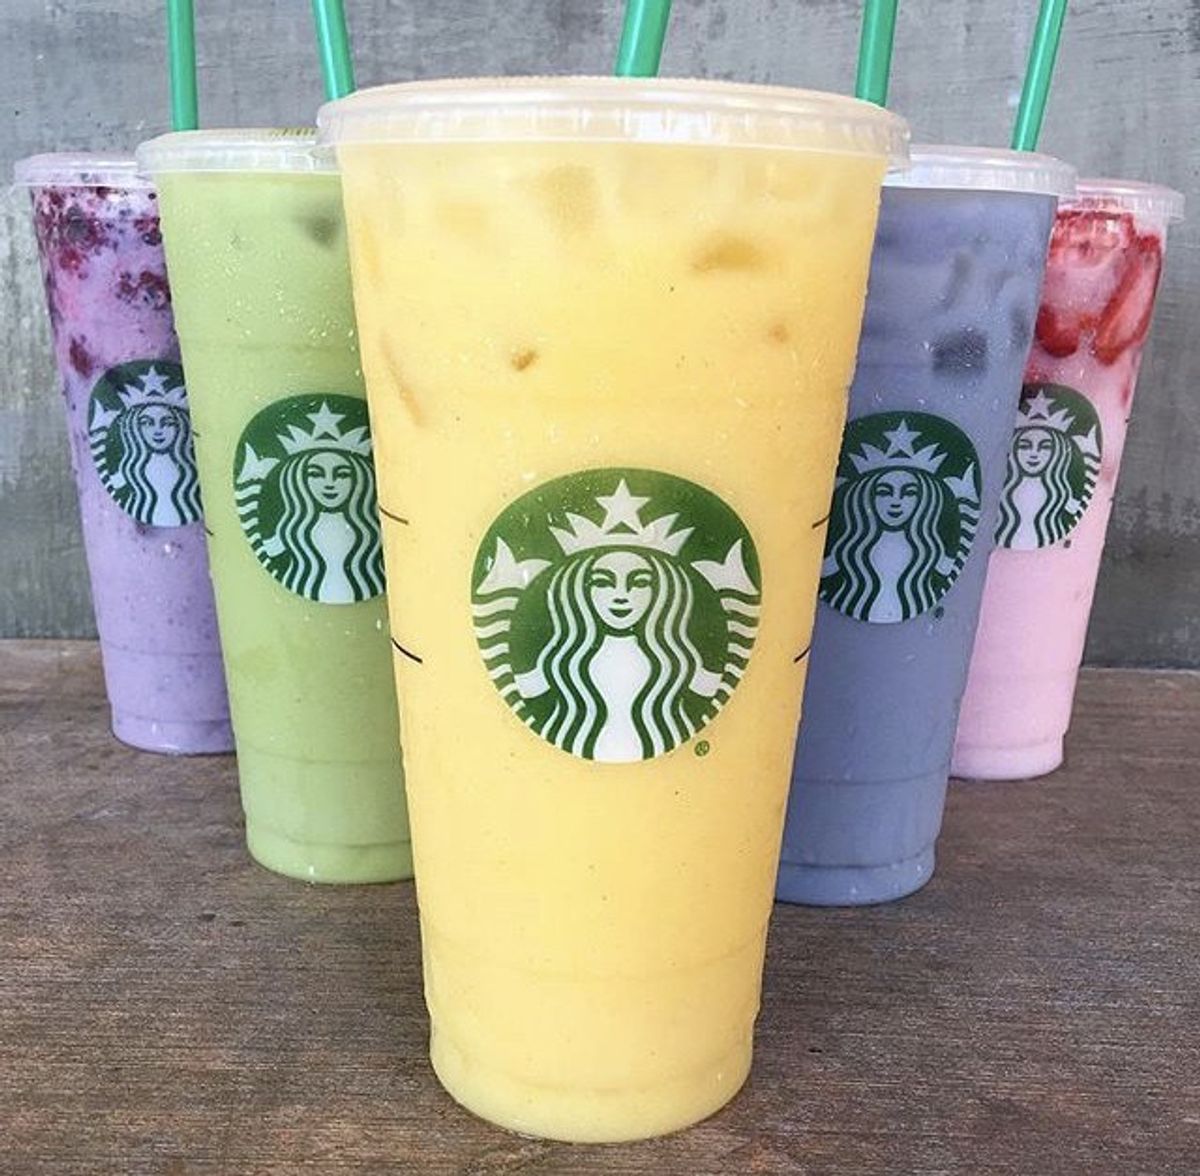 I Tried Starbucks' New Drinks So You Wouldn't Have To